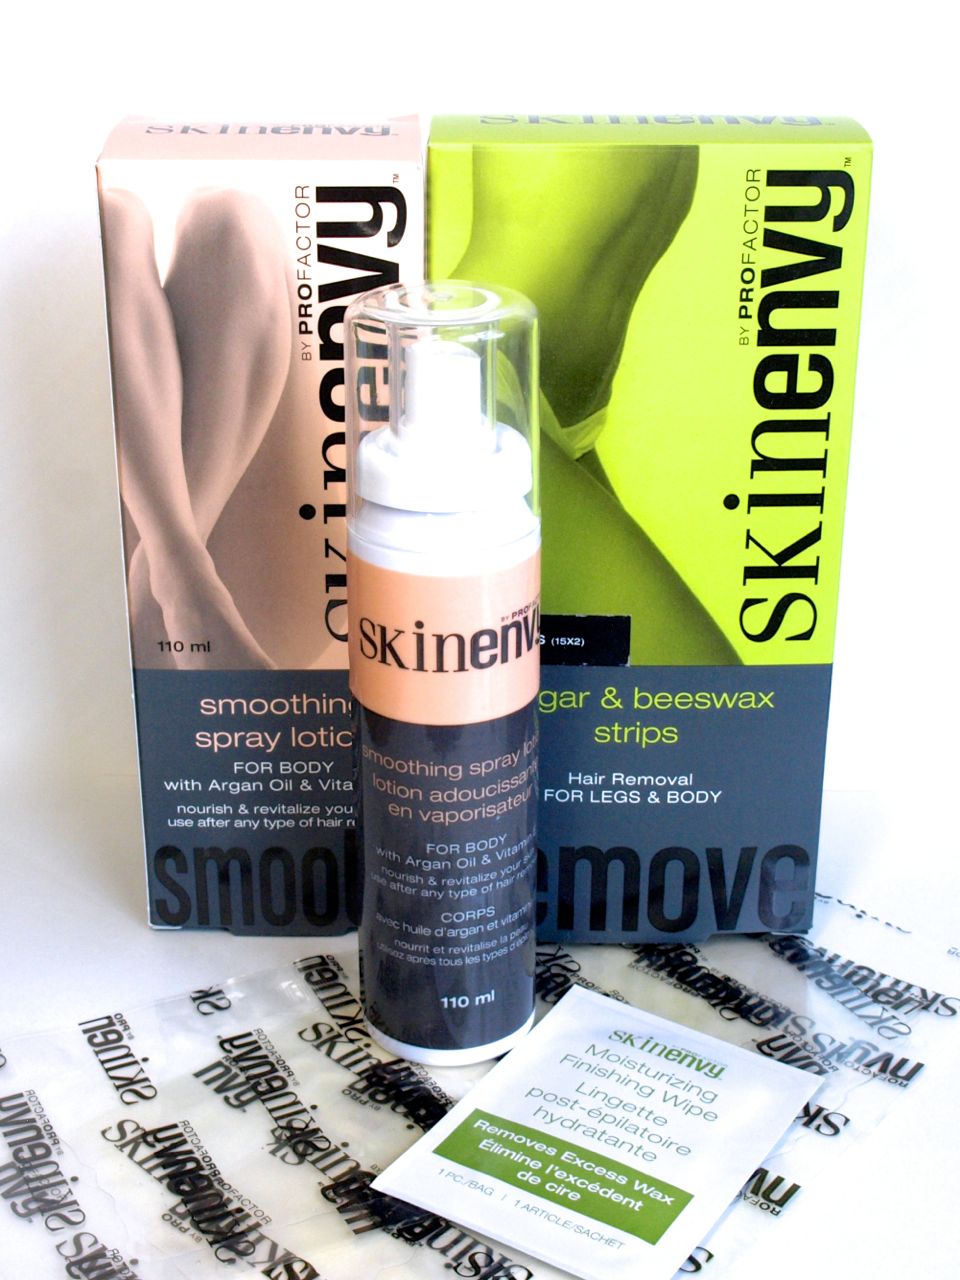 Skinenvy Sugar & Beeswax Hair Removal Strips and Smoothing Spray Lotion: Review